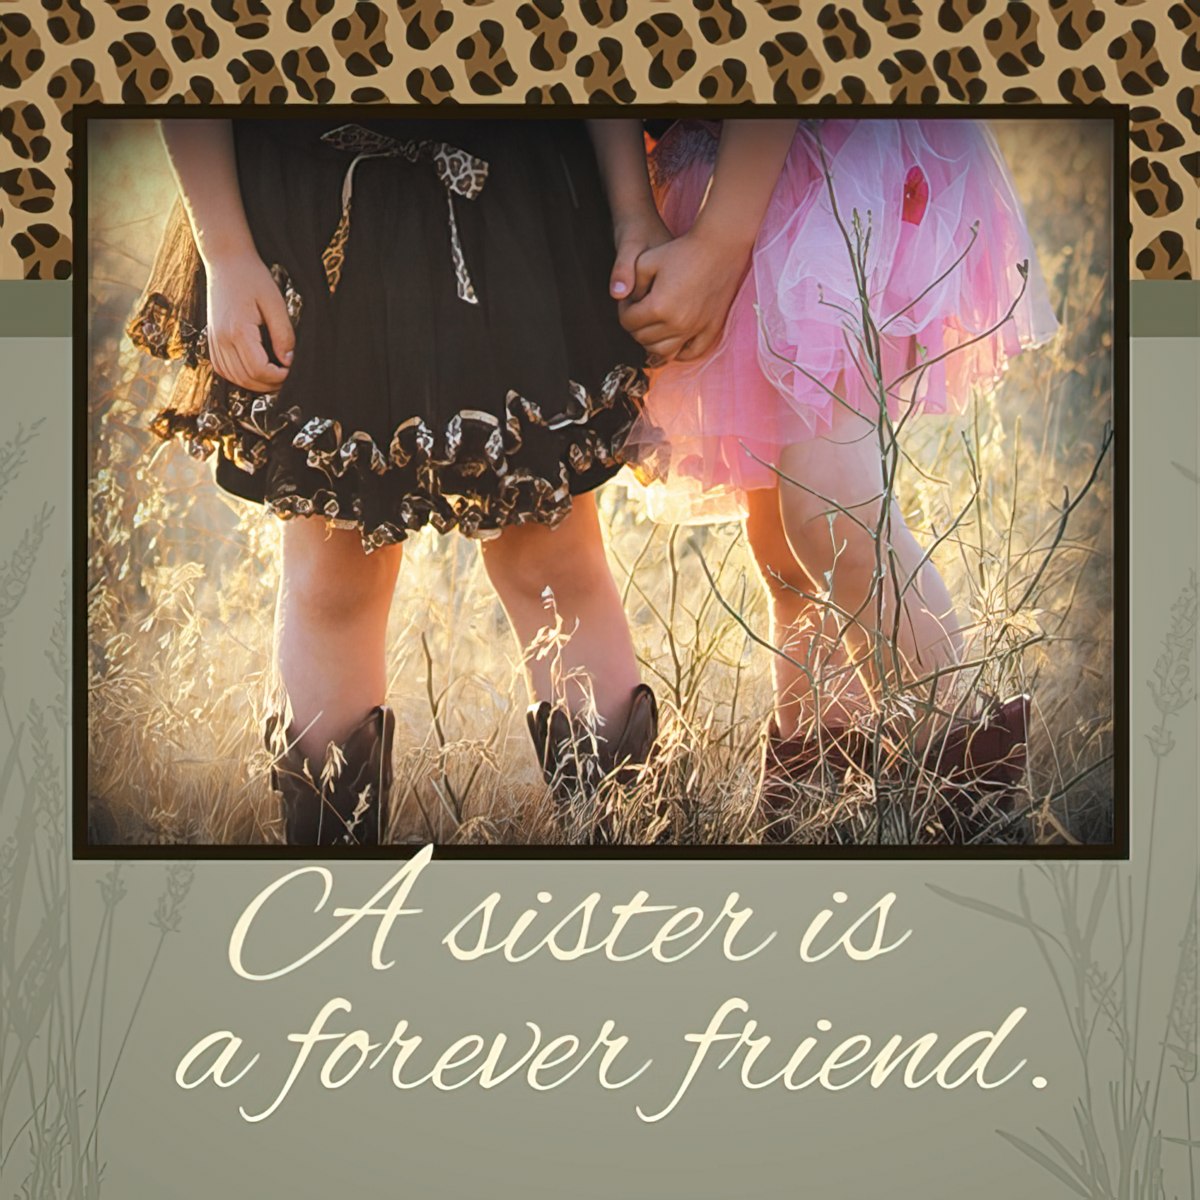 A sister is a forever friend.